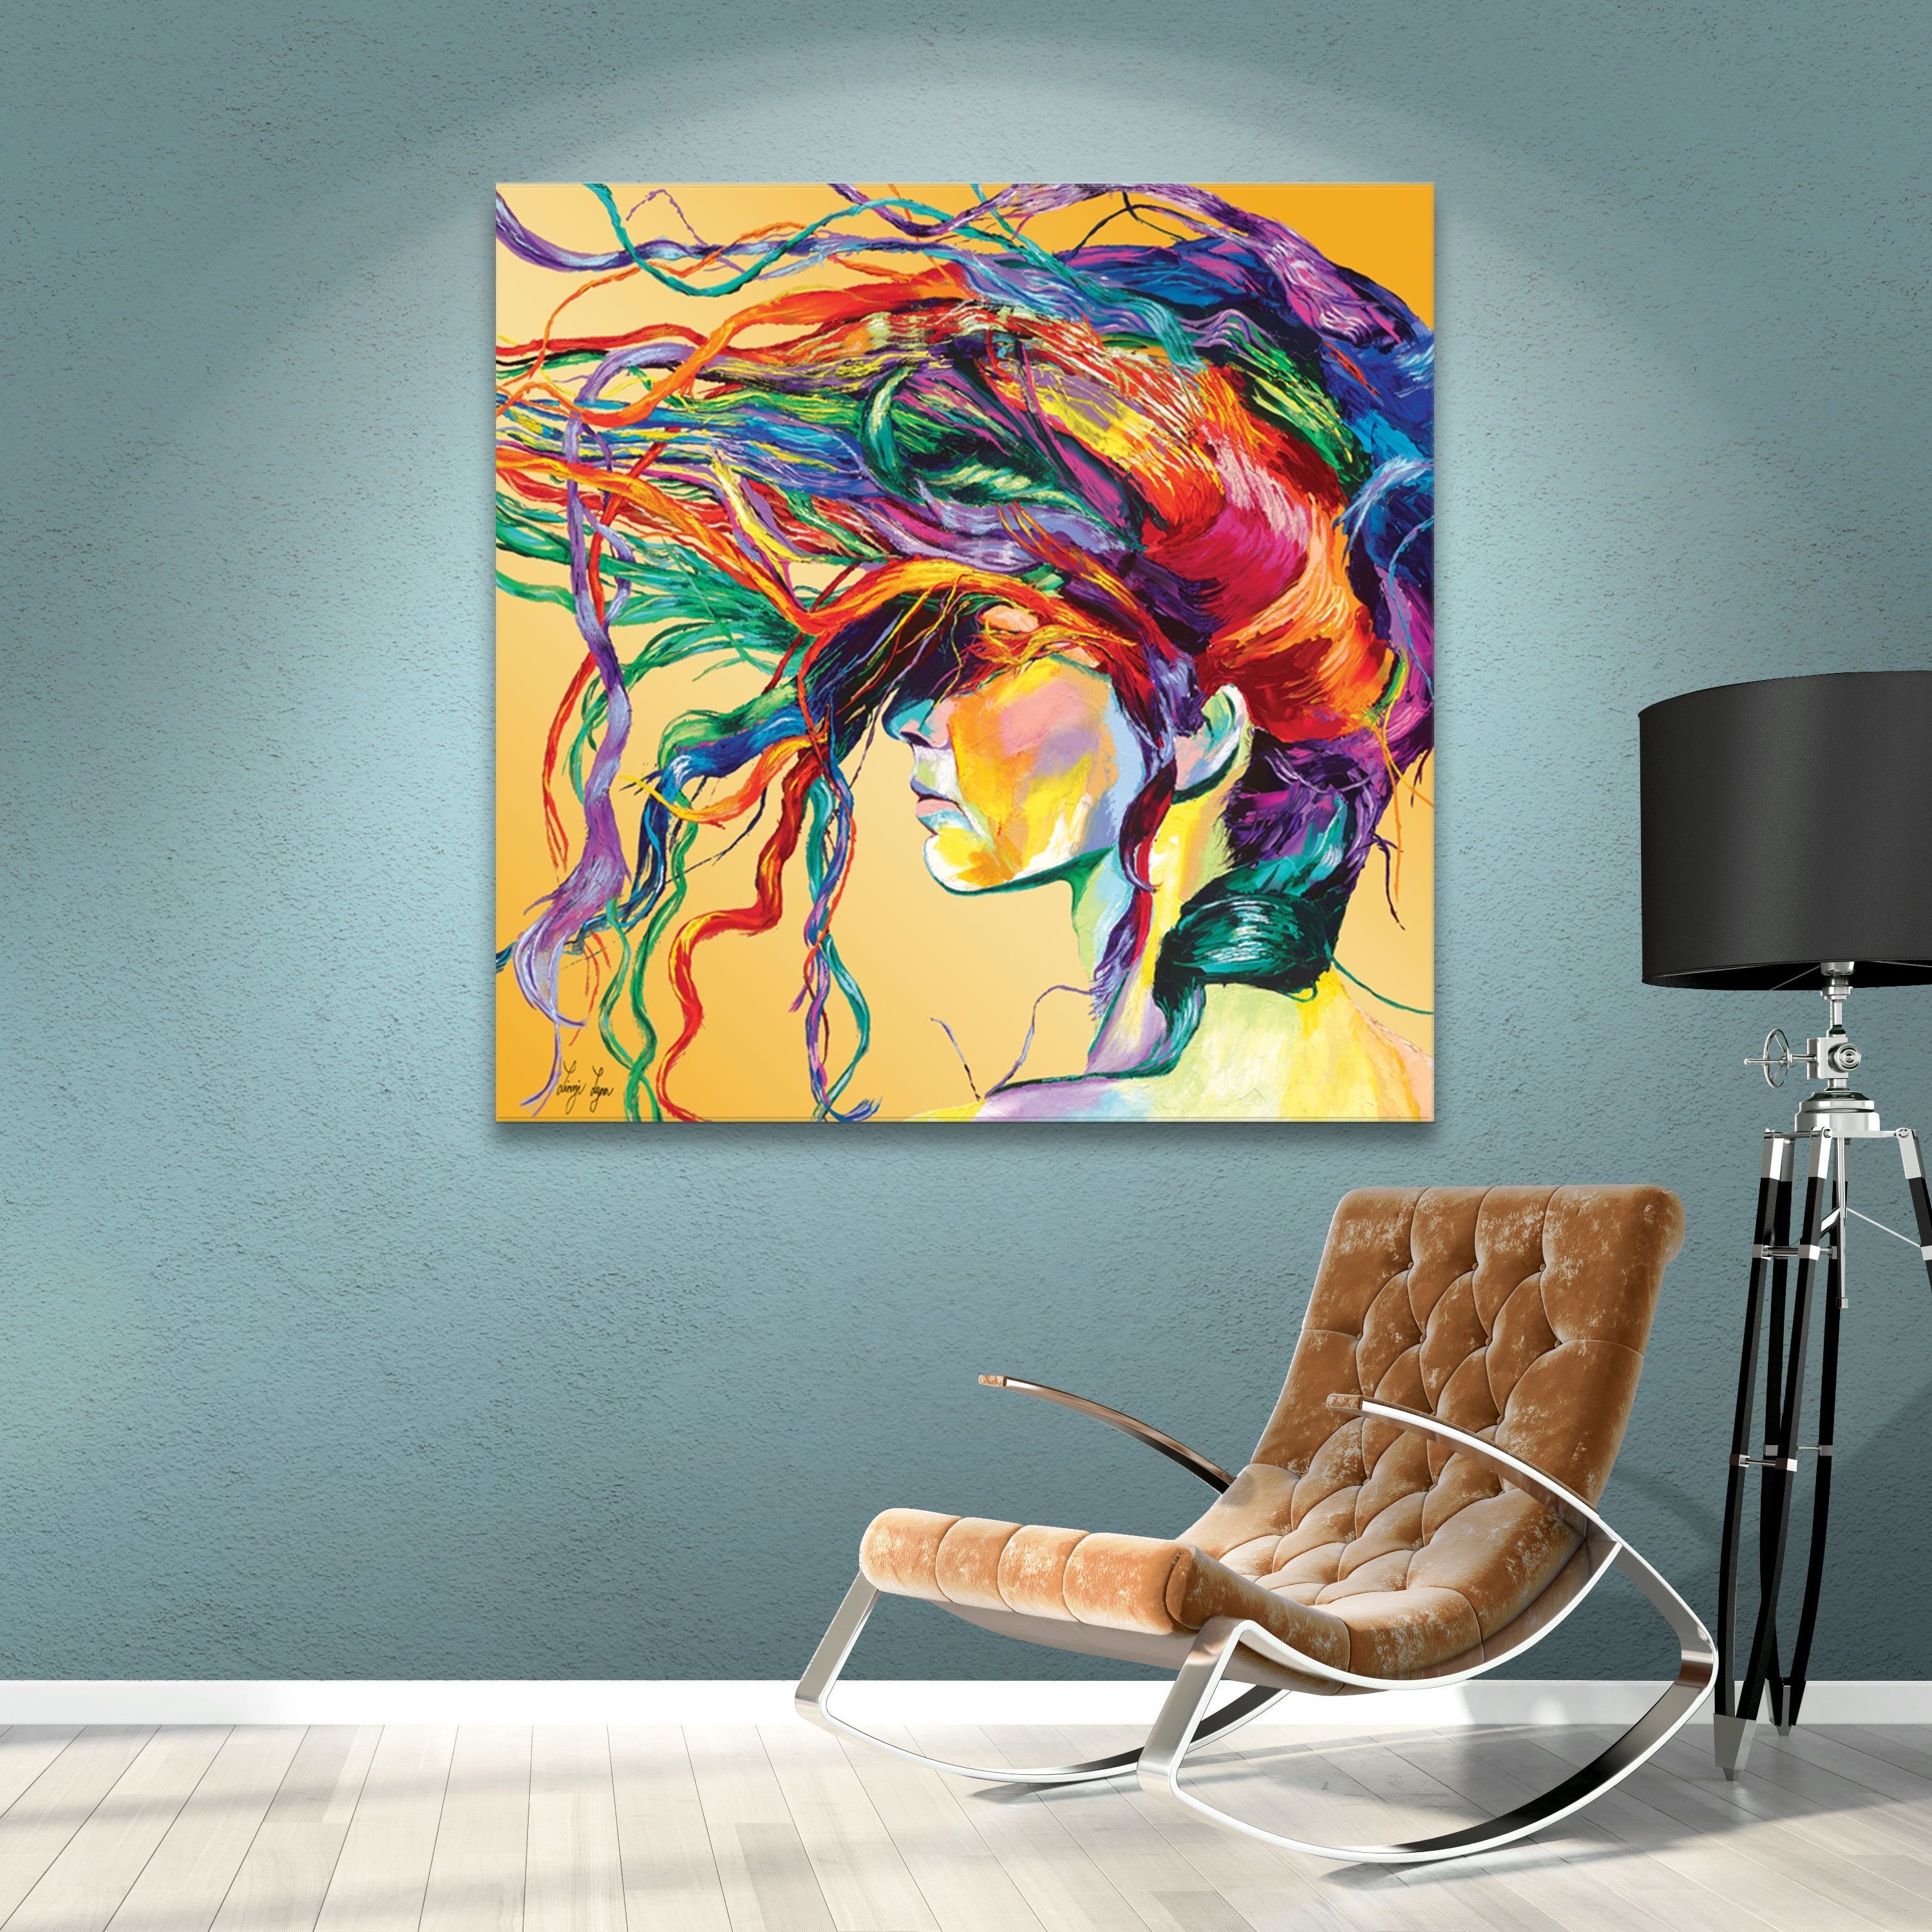 Varick Gallery Windswept Painting Print On Canvas & Reviews With Most Popular Wayfair Wall Art (View 13 of 15)